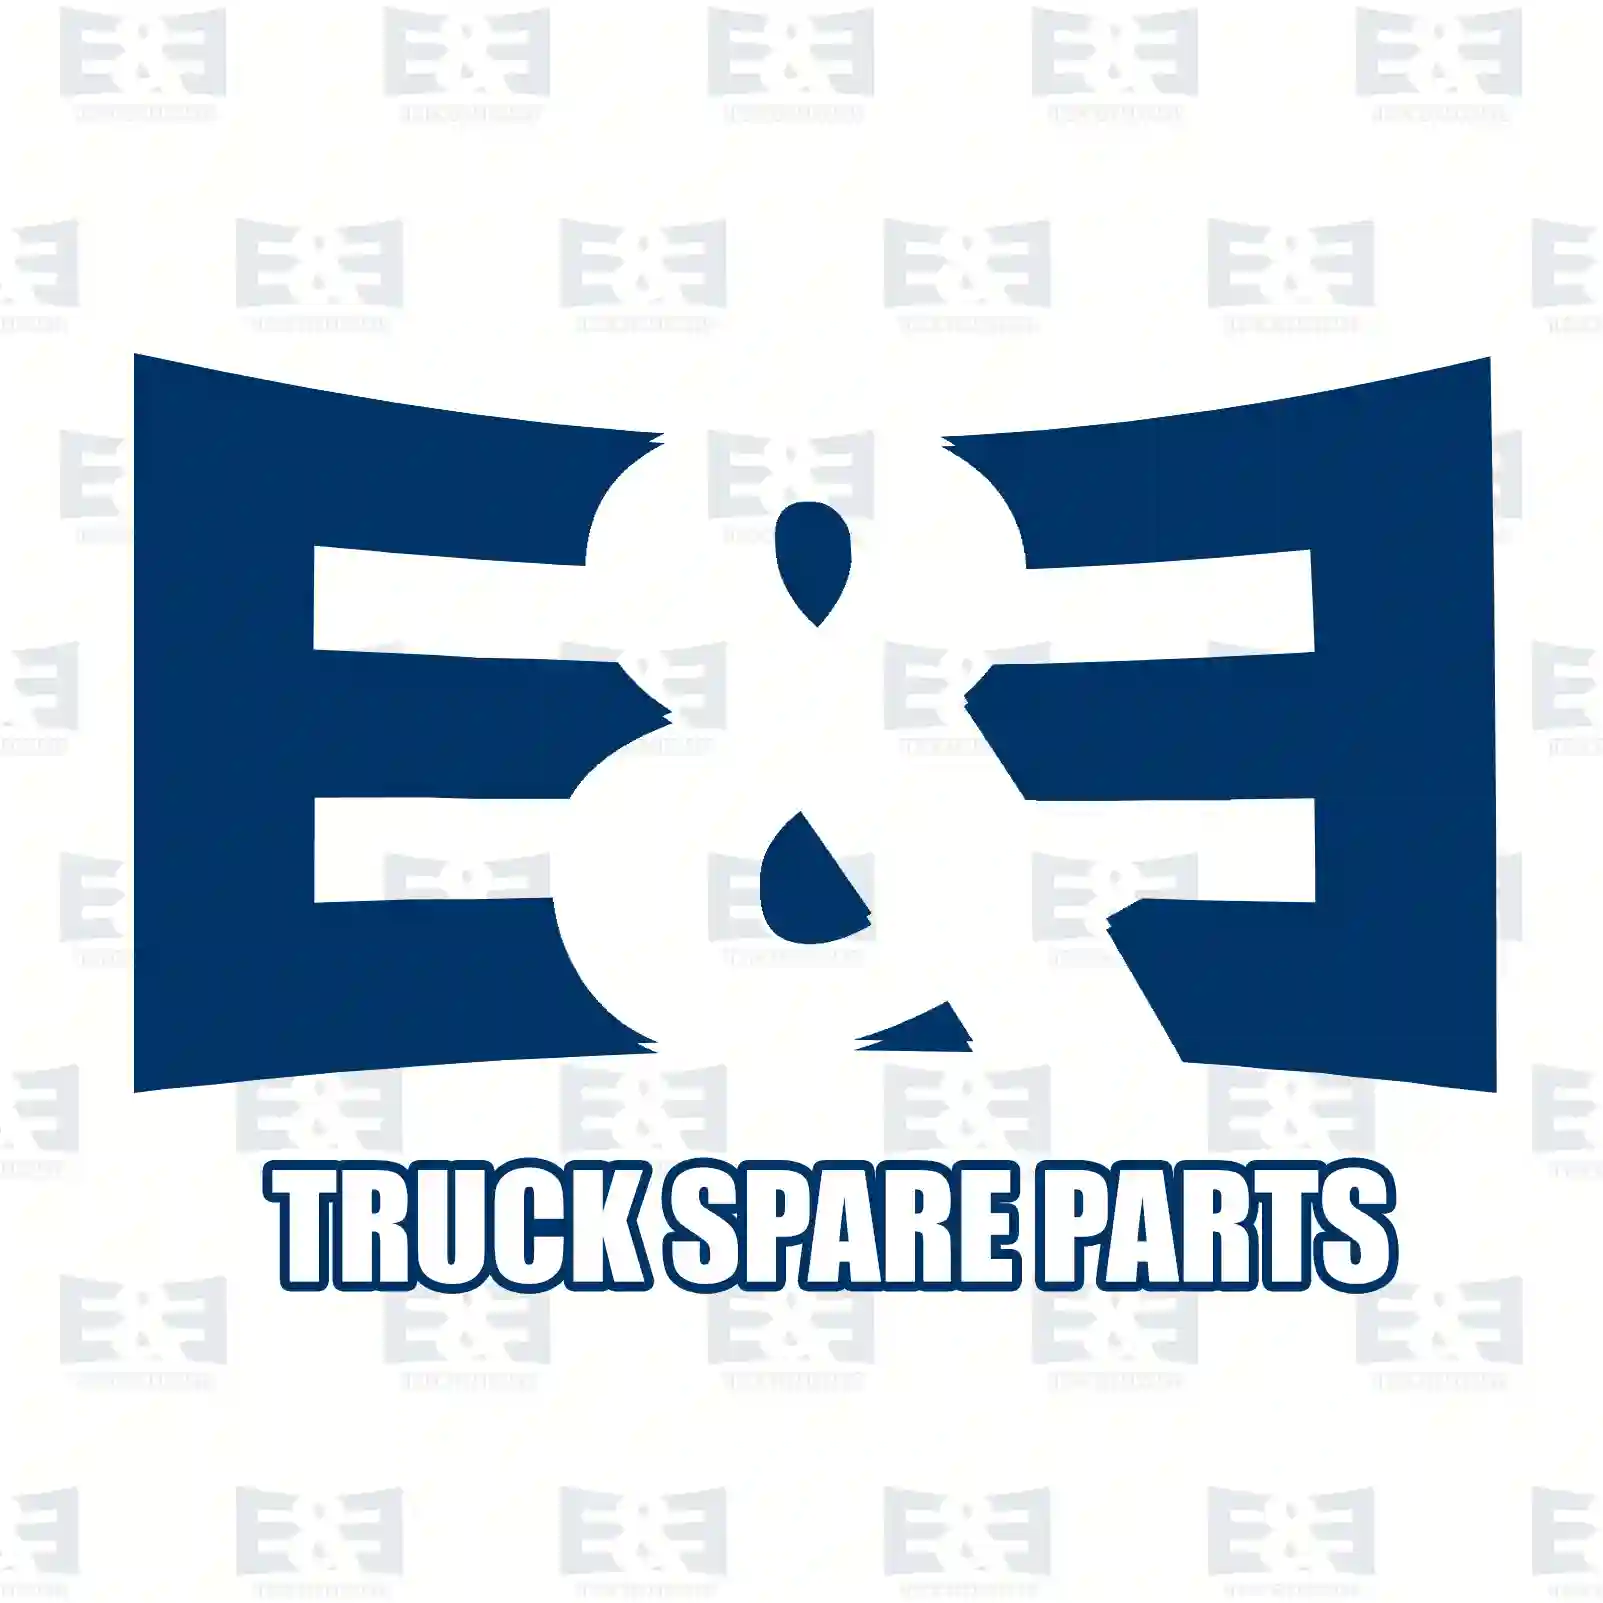 Gasket kit, shifting cylinder housing, 2E2277645, 5001843024S2, ZG30516-0008 ||  2E2277645 E&E Truck Spare Parts | Truck Spare Parts, Auotomotive Spare Parts Gasket kit, shifting cylinder housing, 2E2277645, 5001843024S2, ZG30516-0008 ||  2E2277645 E&E Truck Spare Parts | Truck Spare Parts, Auotomotive Spare Parts